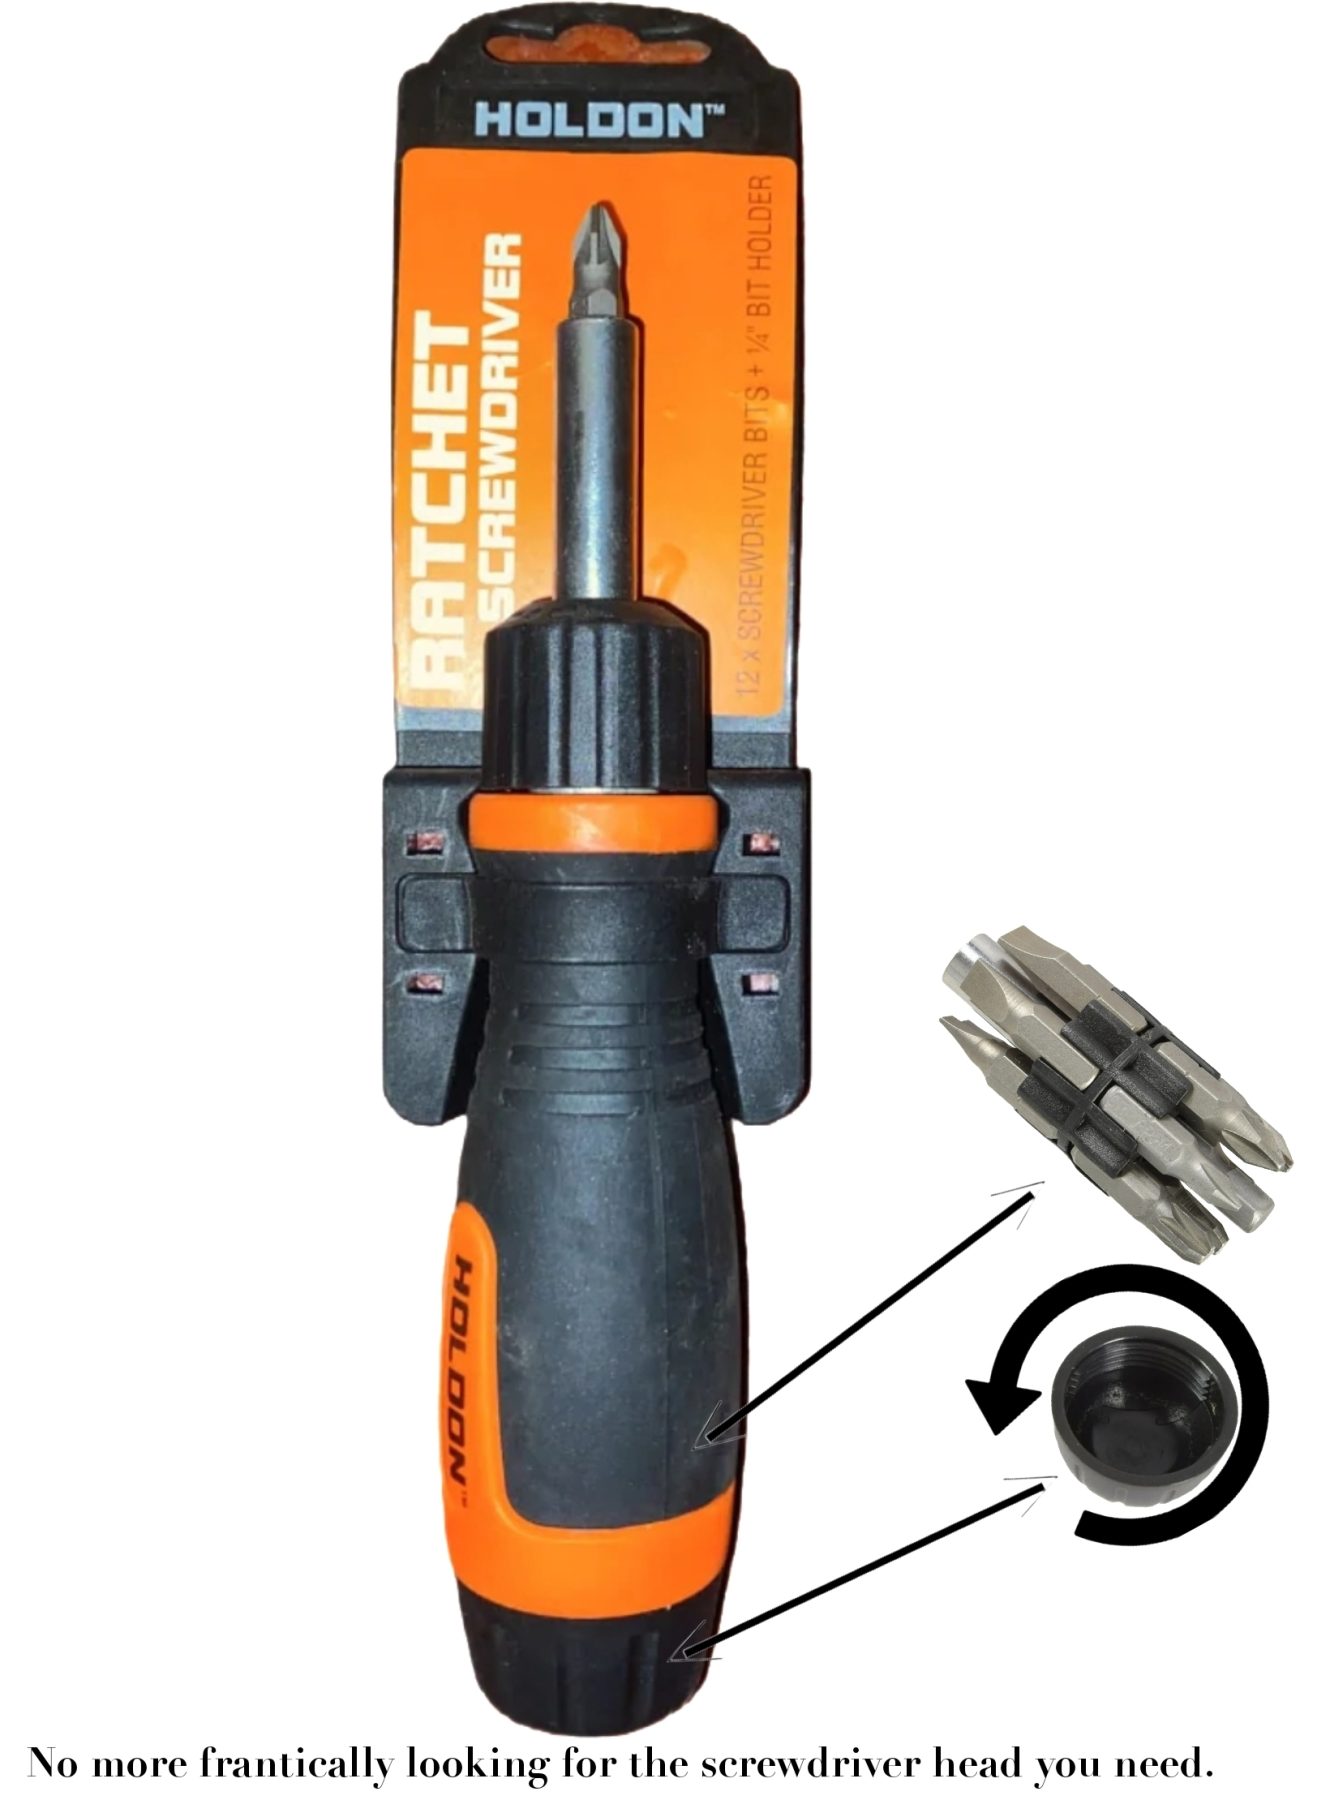 Holdon Offset Ratchet Screwdriver: Including 12 tough and durable bits attached to a bit holder stored inside the handle.